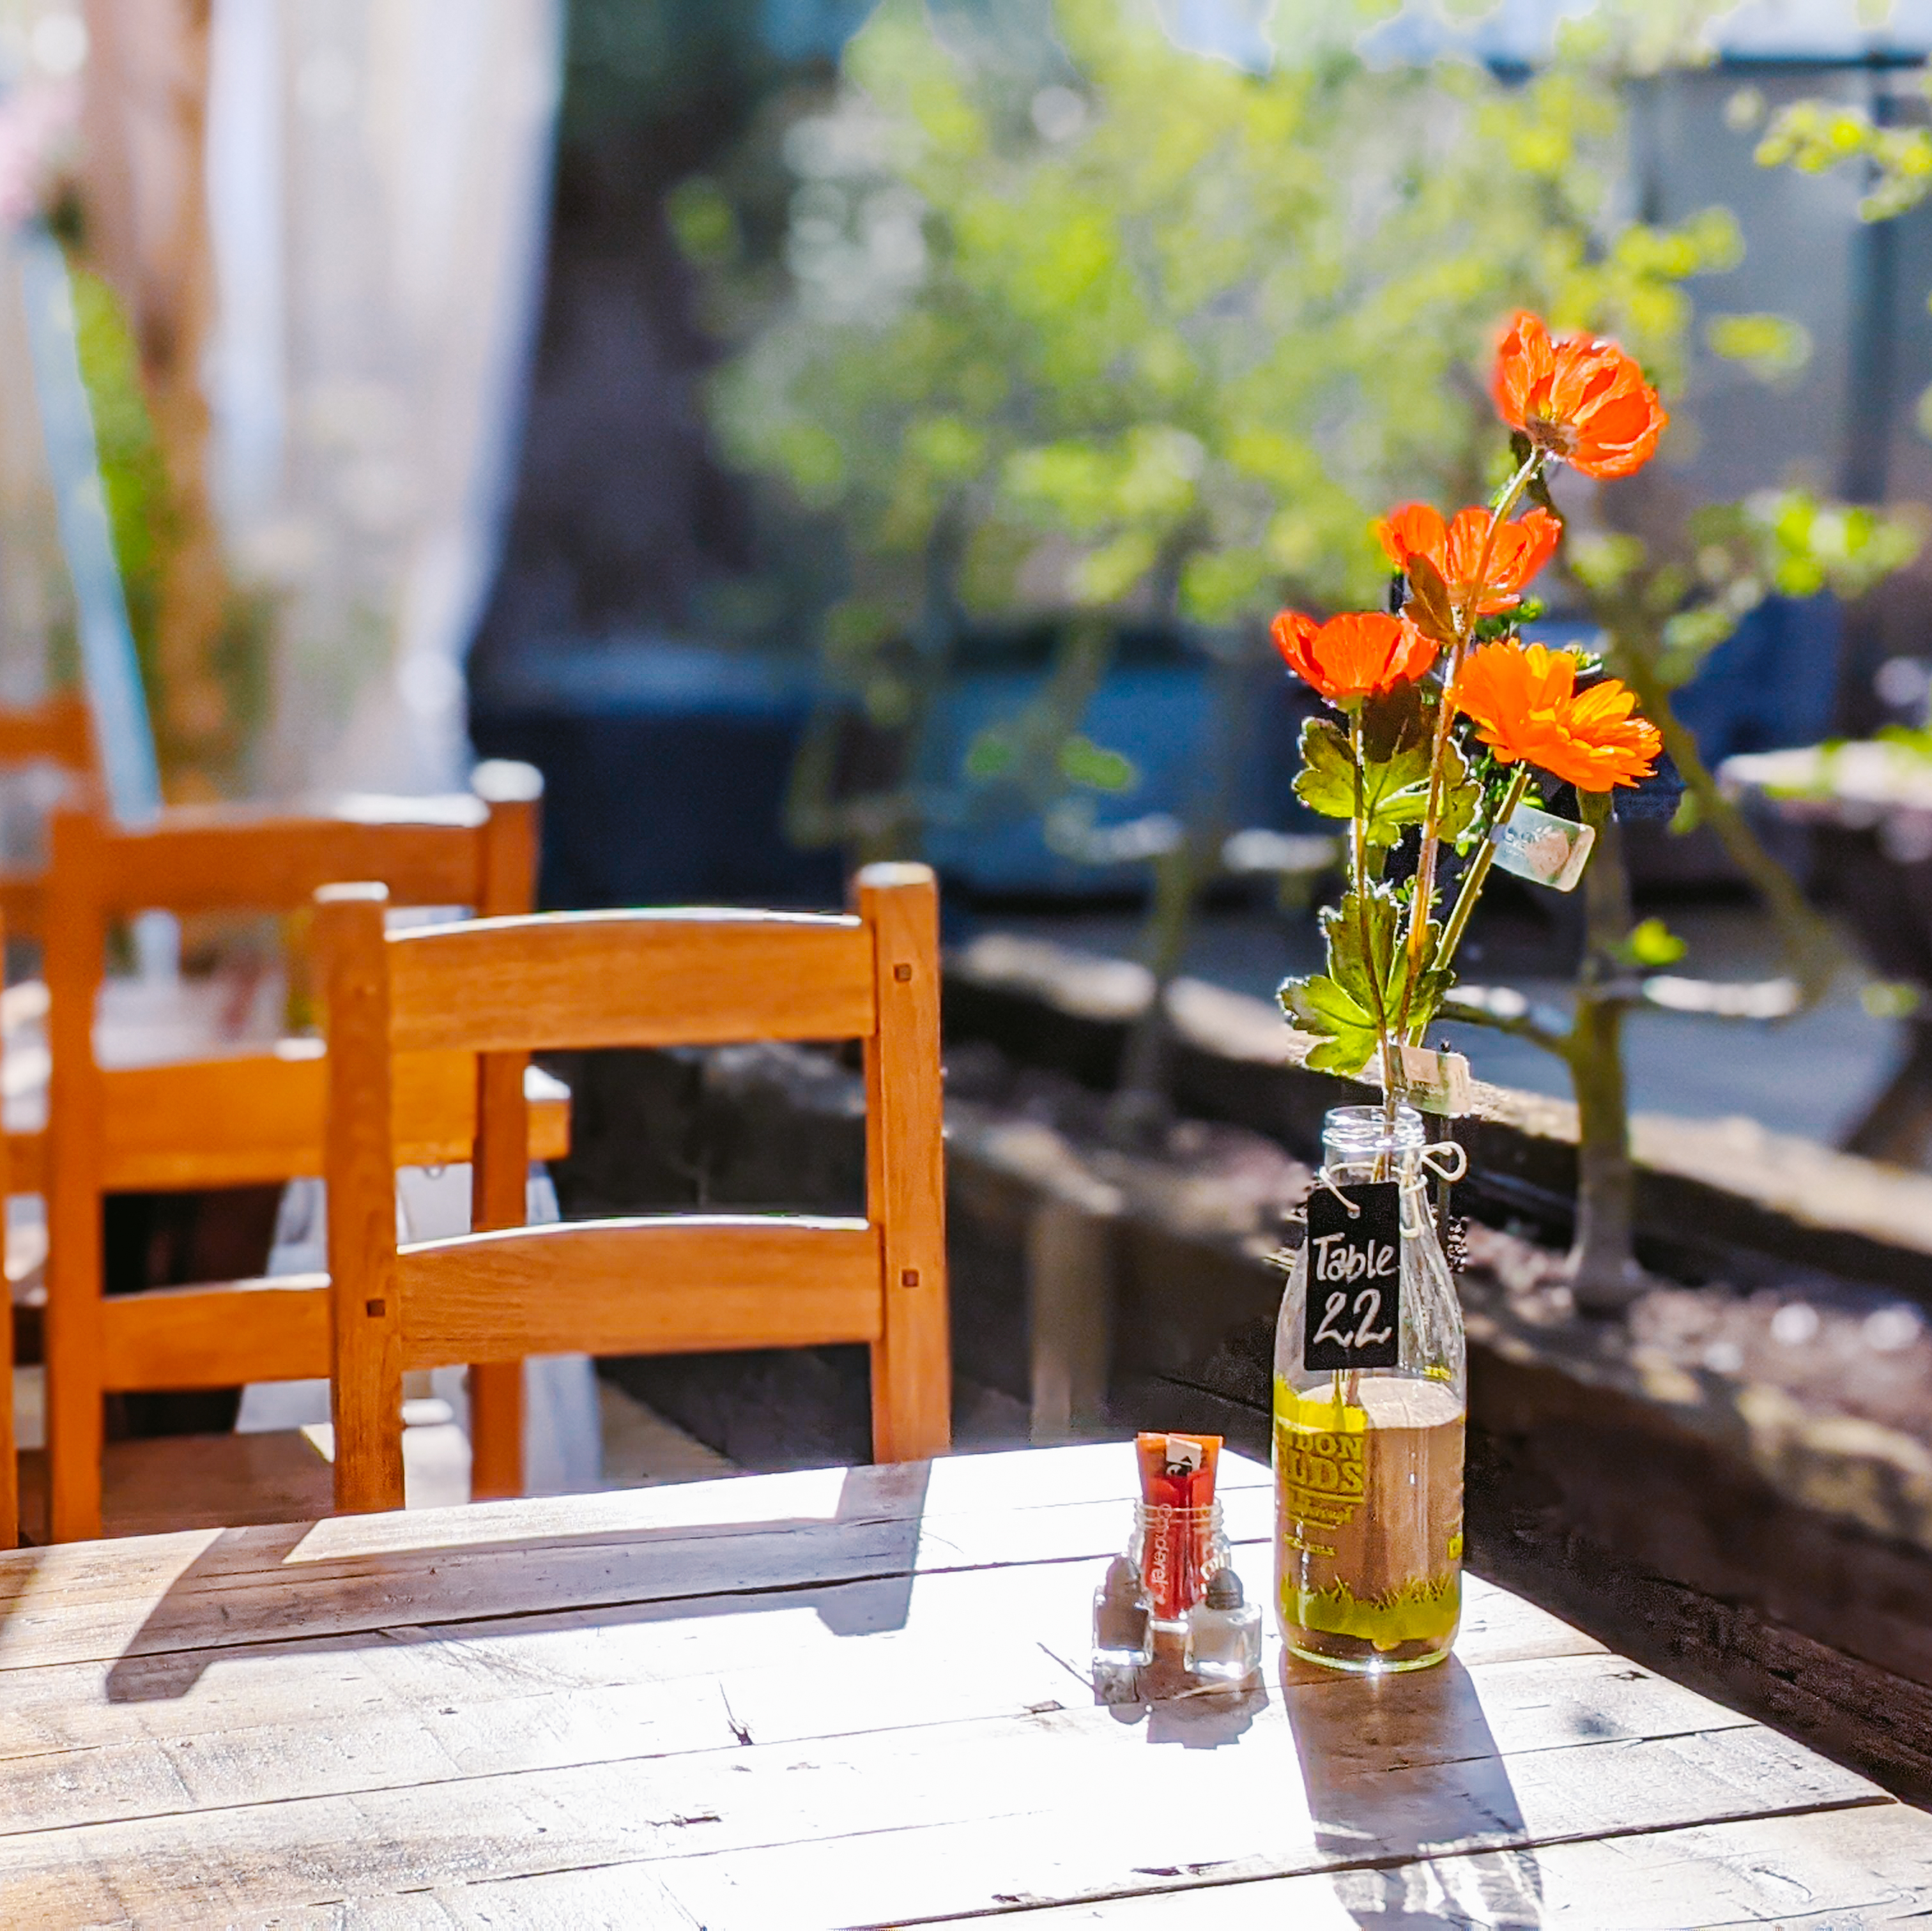 A week of Spring sunshine for our Farmer's Kitchen reopening â˜€ï¸�